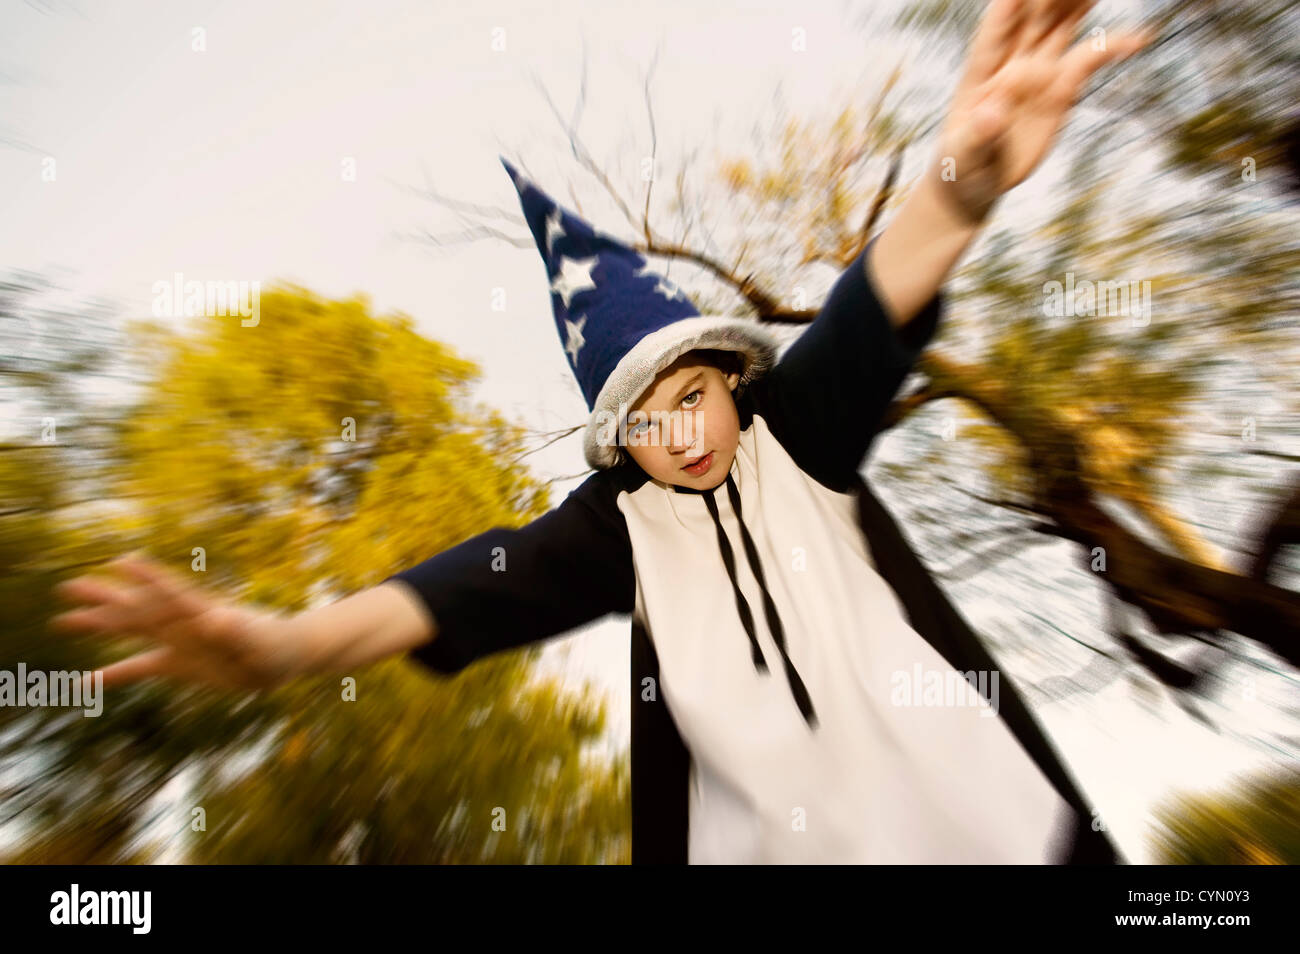 Young boy in a wizard costume with his arms outstretched Stock Photo